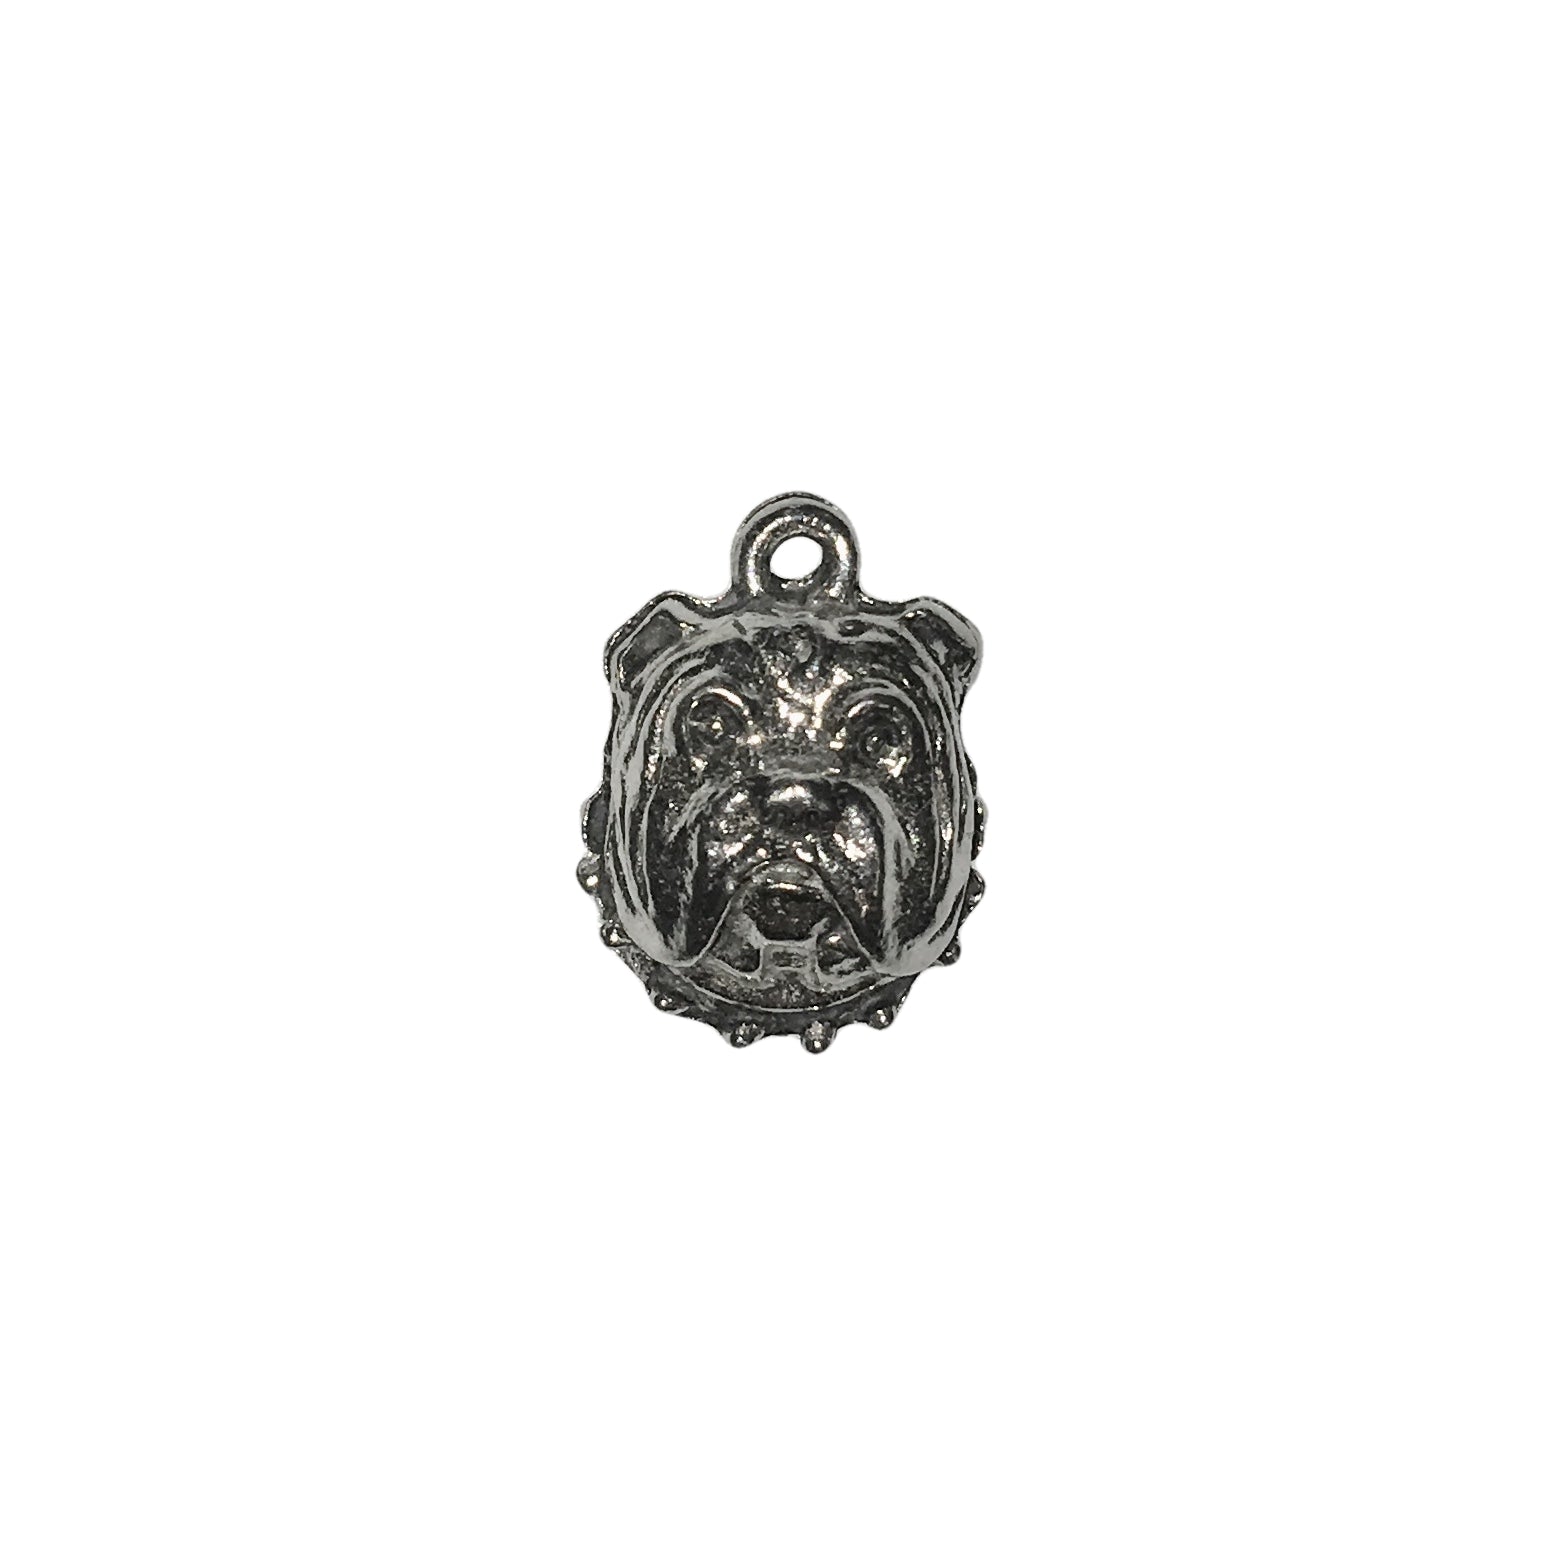 Bull Dog Head Charms - Qty 5 - Lead Free Pewter Silver - American Made